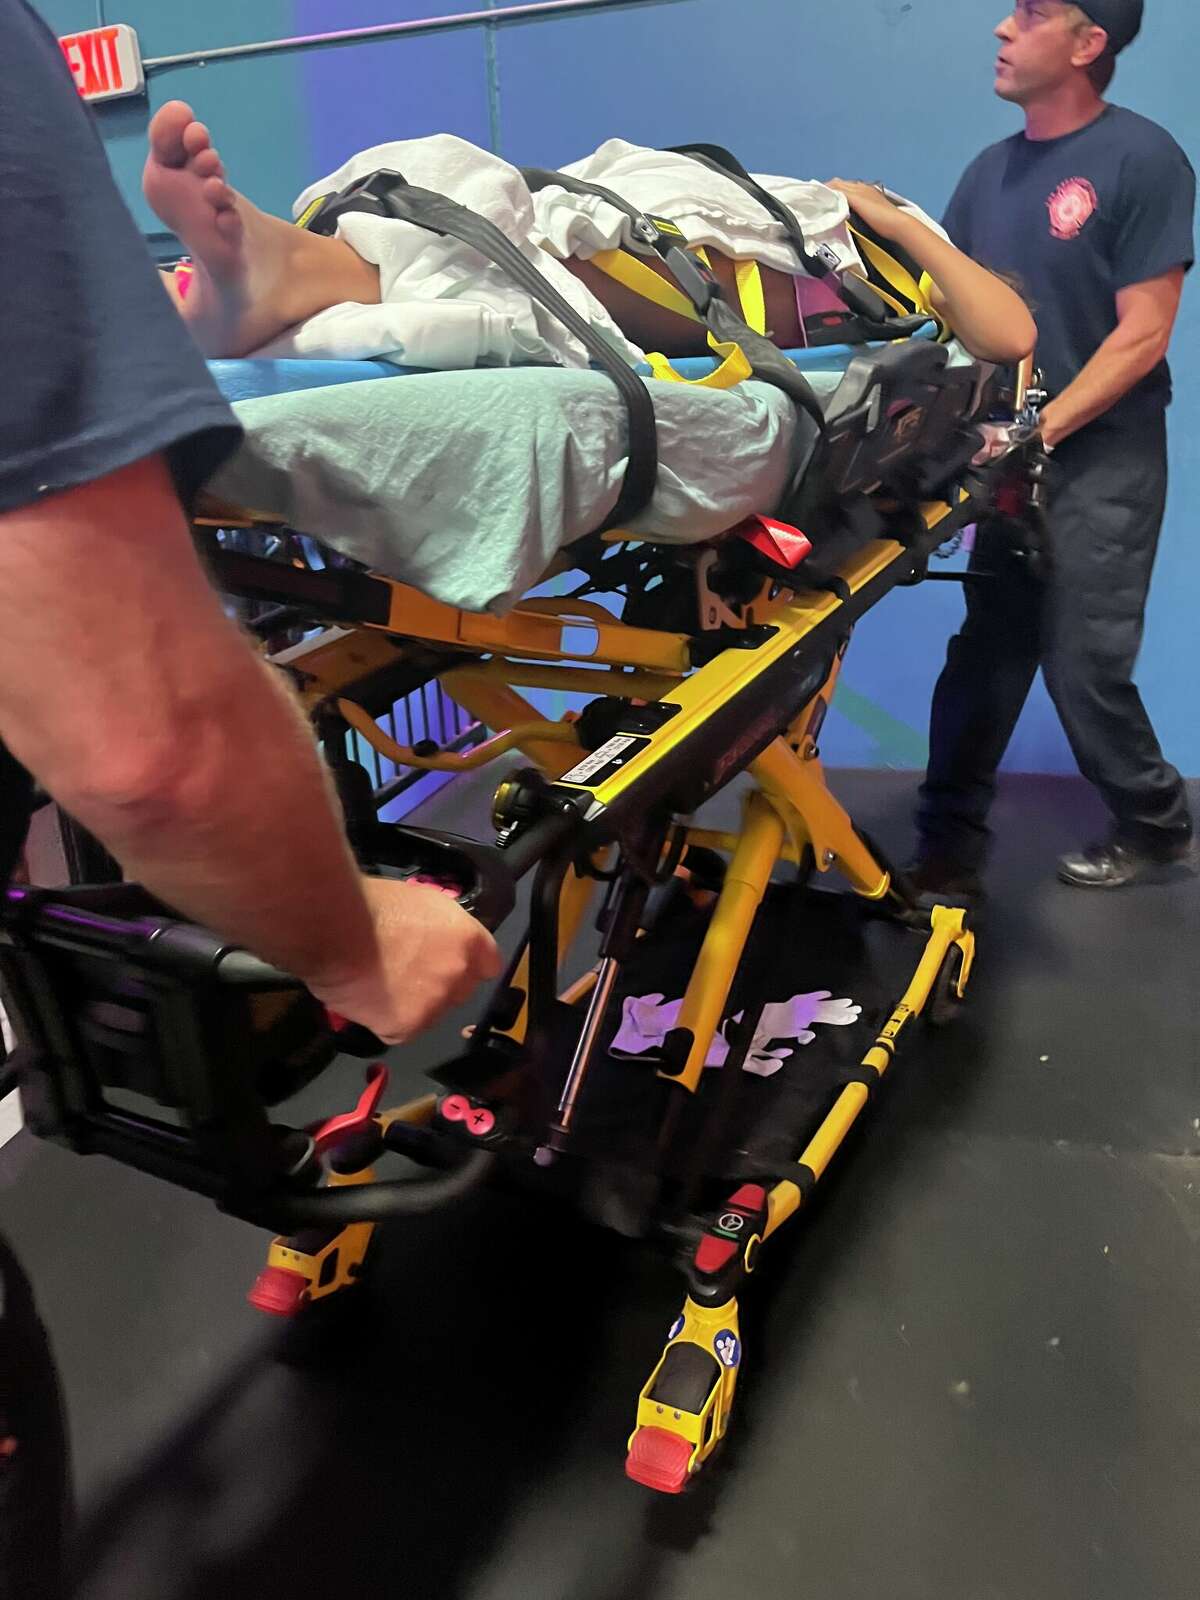 The family of a 14-year-old girl is filing a lawsuit against an indoor trampoline park in Sugar Land after a rock climbing incident allegedly left her with several major injuries.